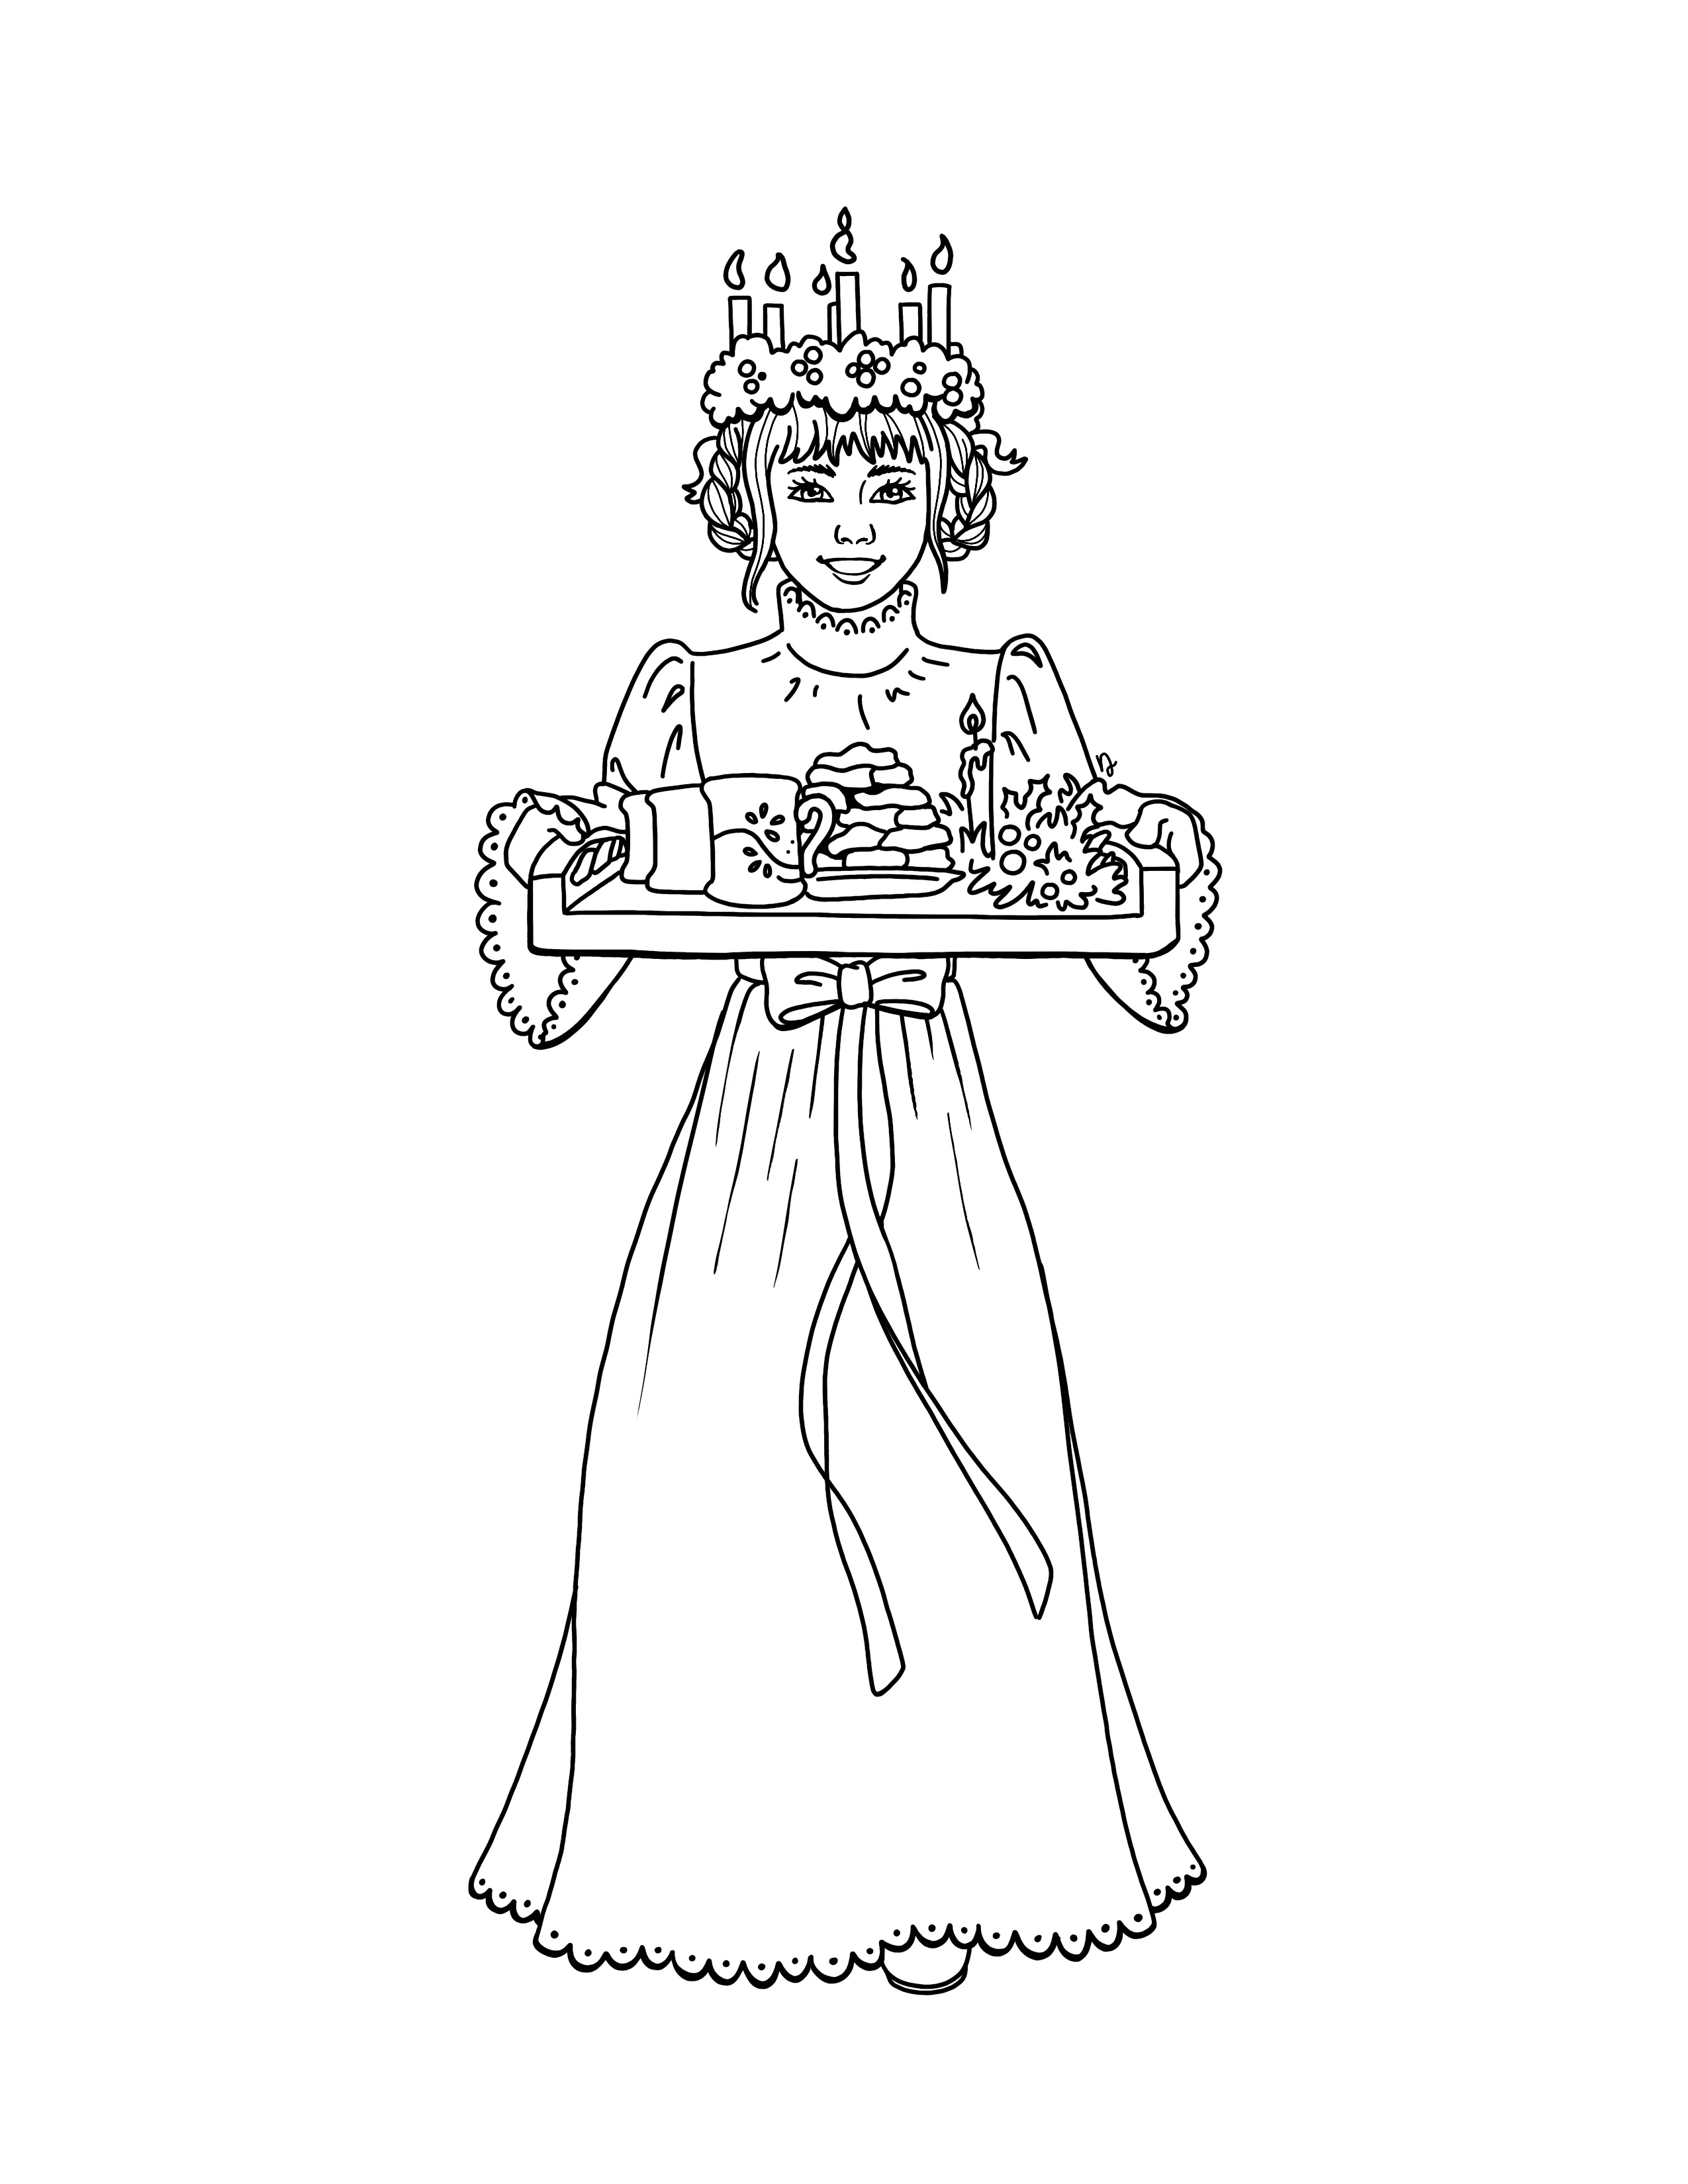 American girl kirsten st lucia coloring page